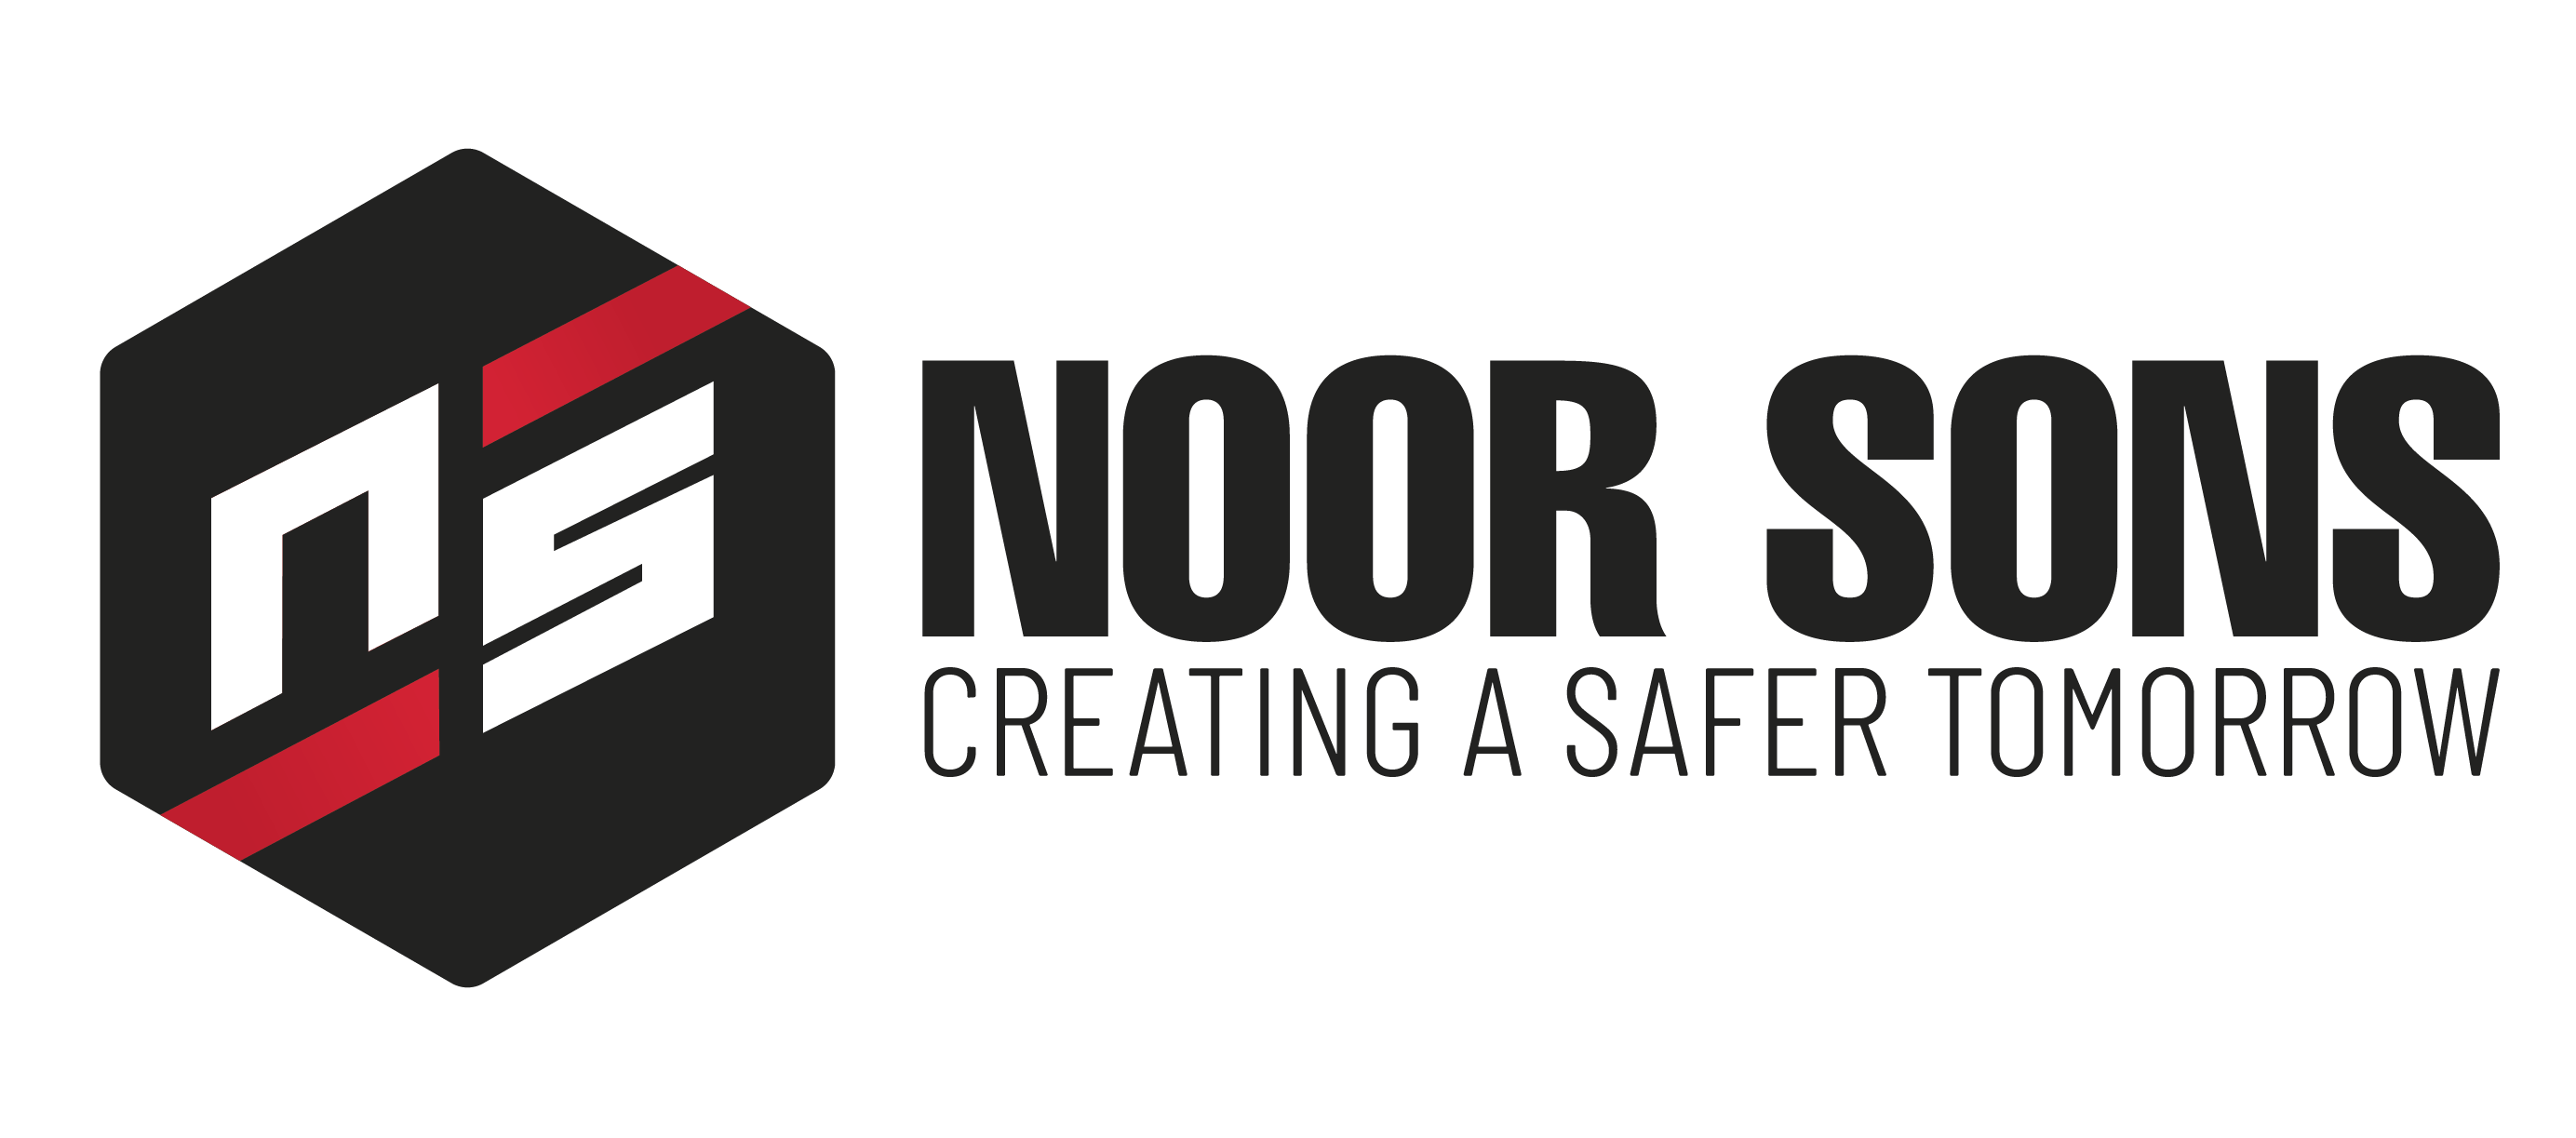 Noor Sons Creating a Safer Tomorrow Business Logo